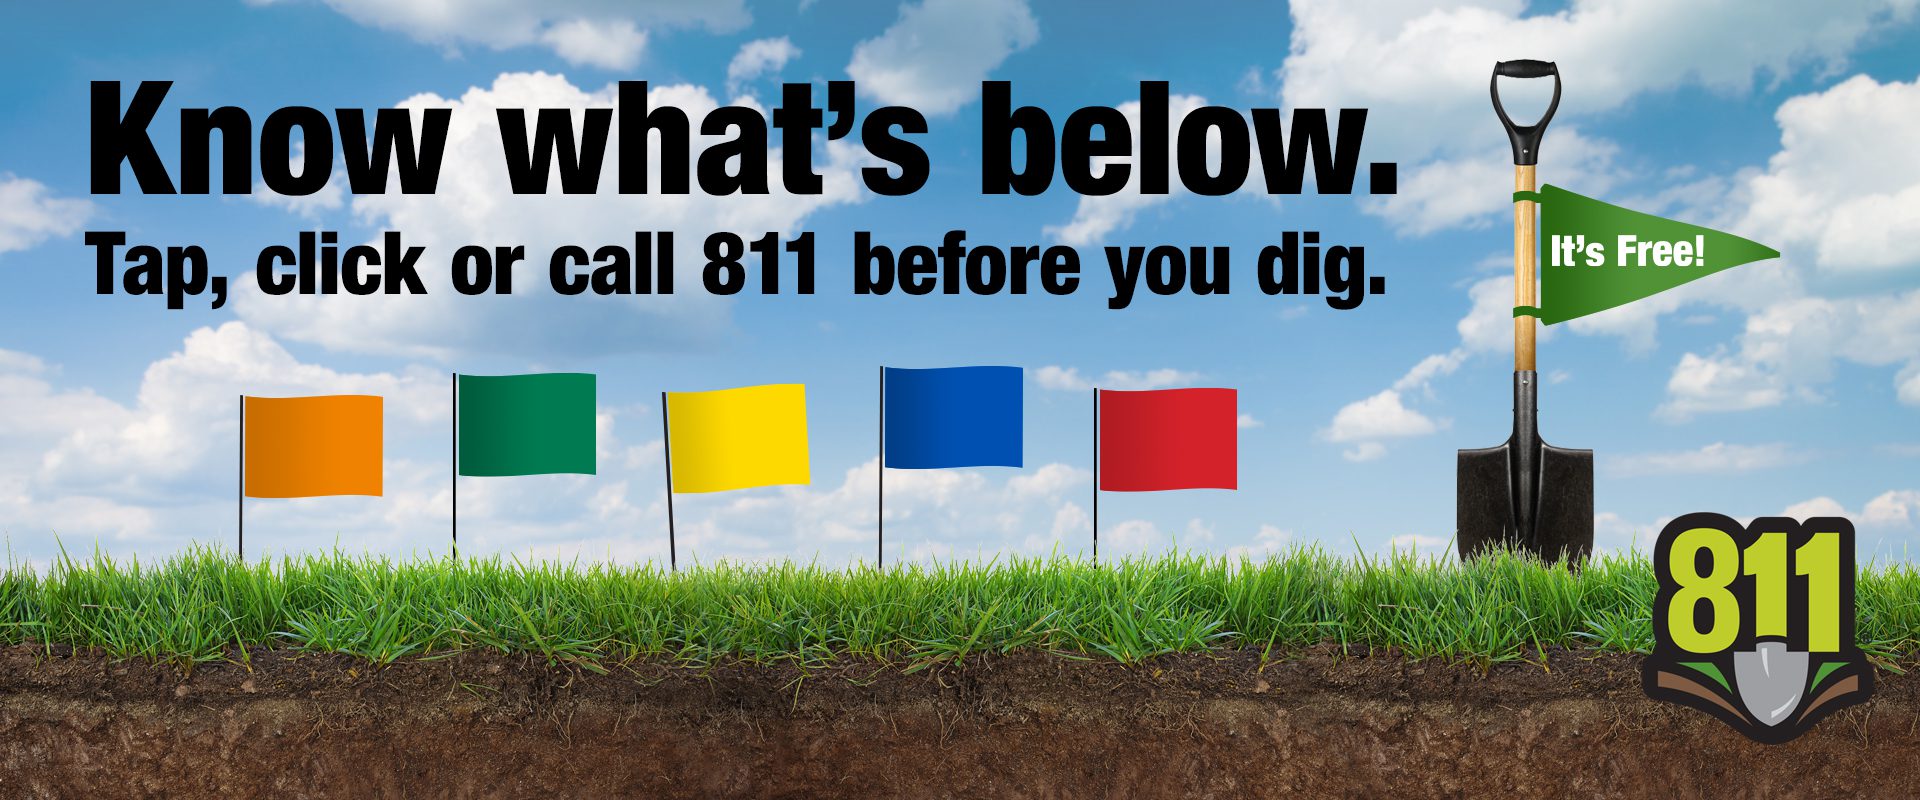 Know what's below. Tap, click or call 811 before you dig.